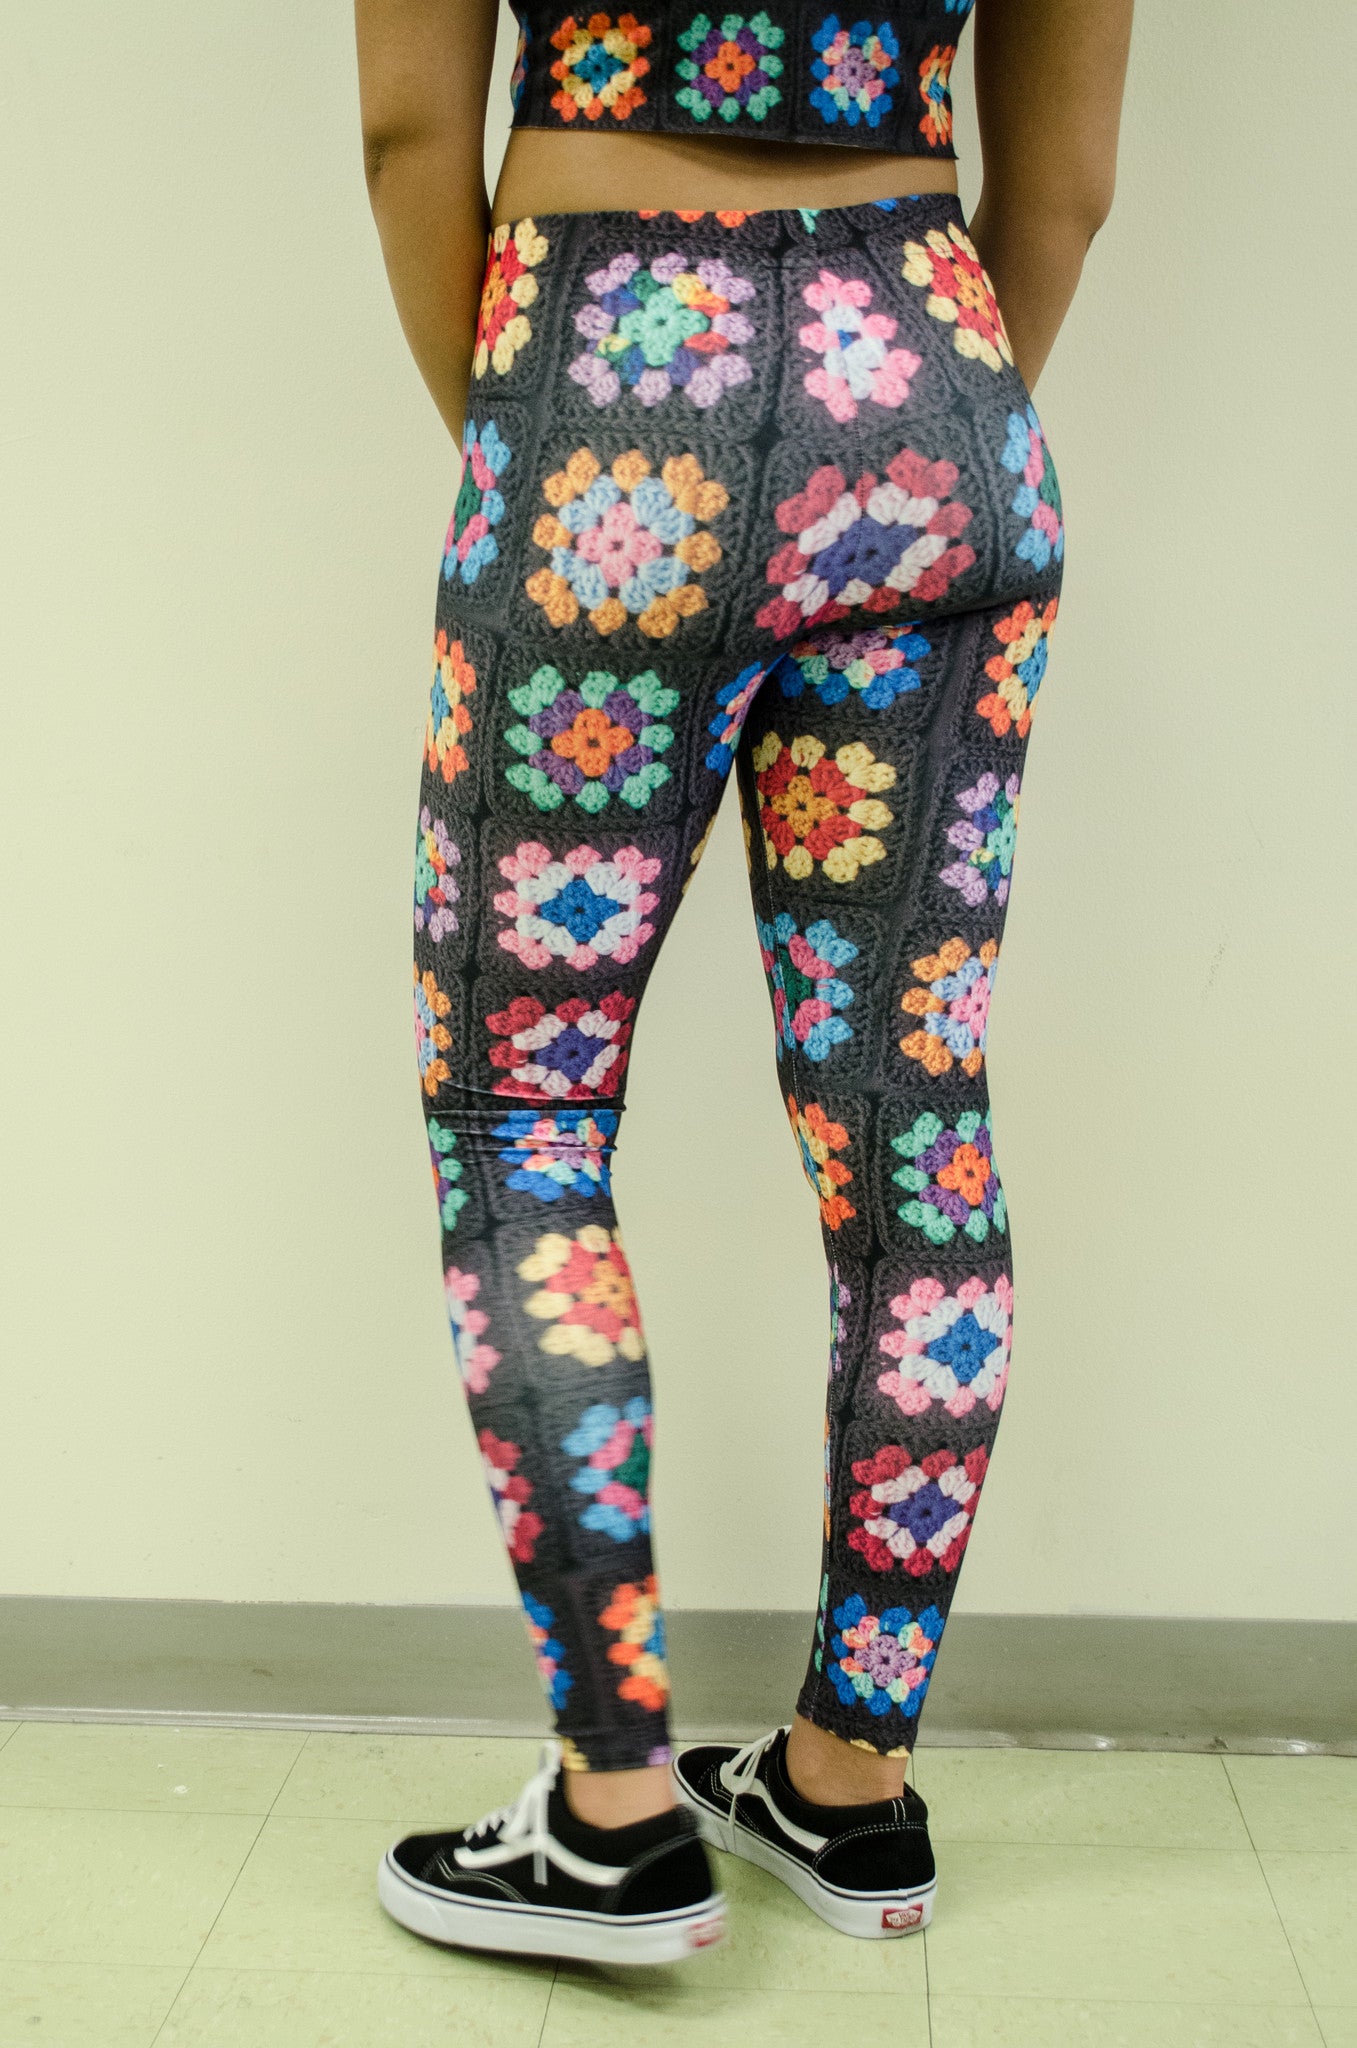 Snapdragon Brand Clothing Granny Square Crochet Print black leggings in style Kaleidoscope features a 1960s vintage boho feel and a rainbow of colors. Made of comfortable spandex.